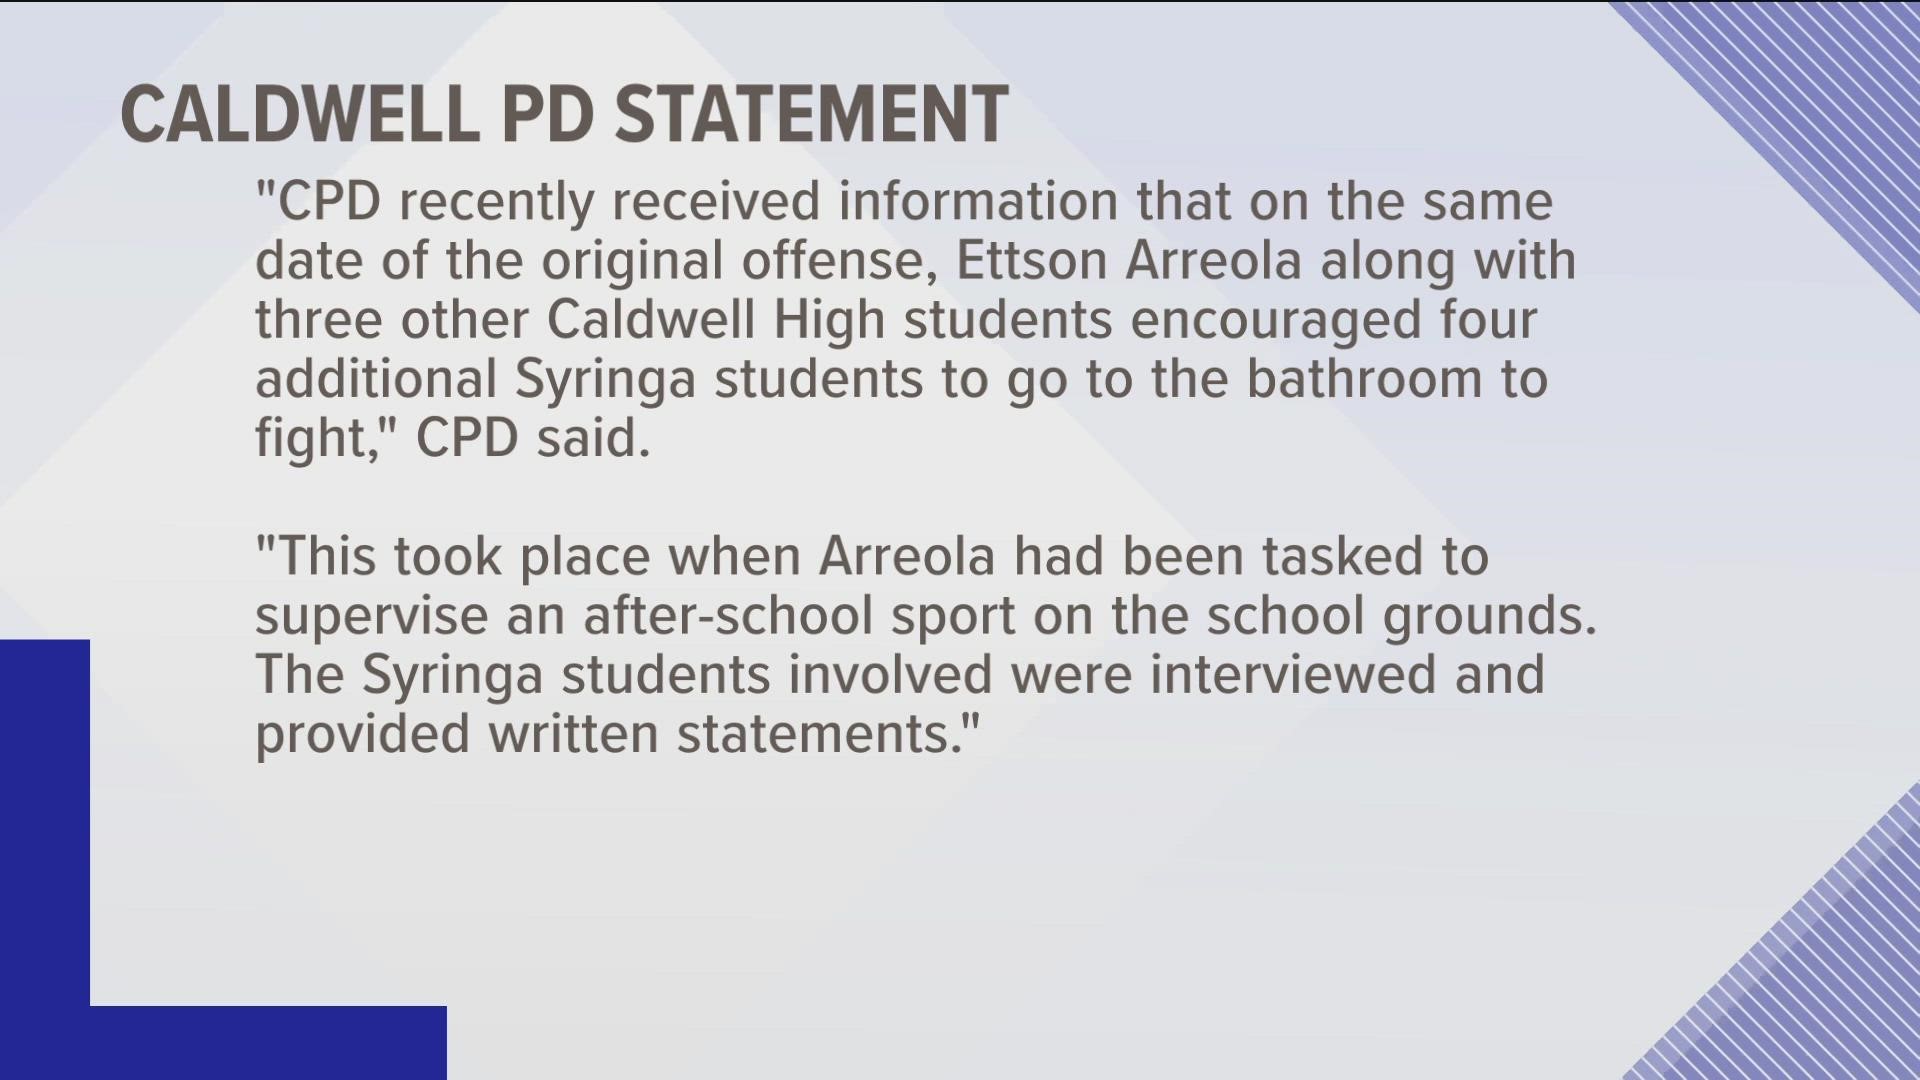 Police release new information about incident involving a substitute teacher in Caldwell who was arrested after encouraging students to fight in his classroom.